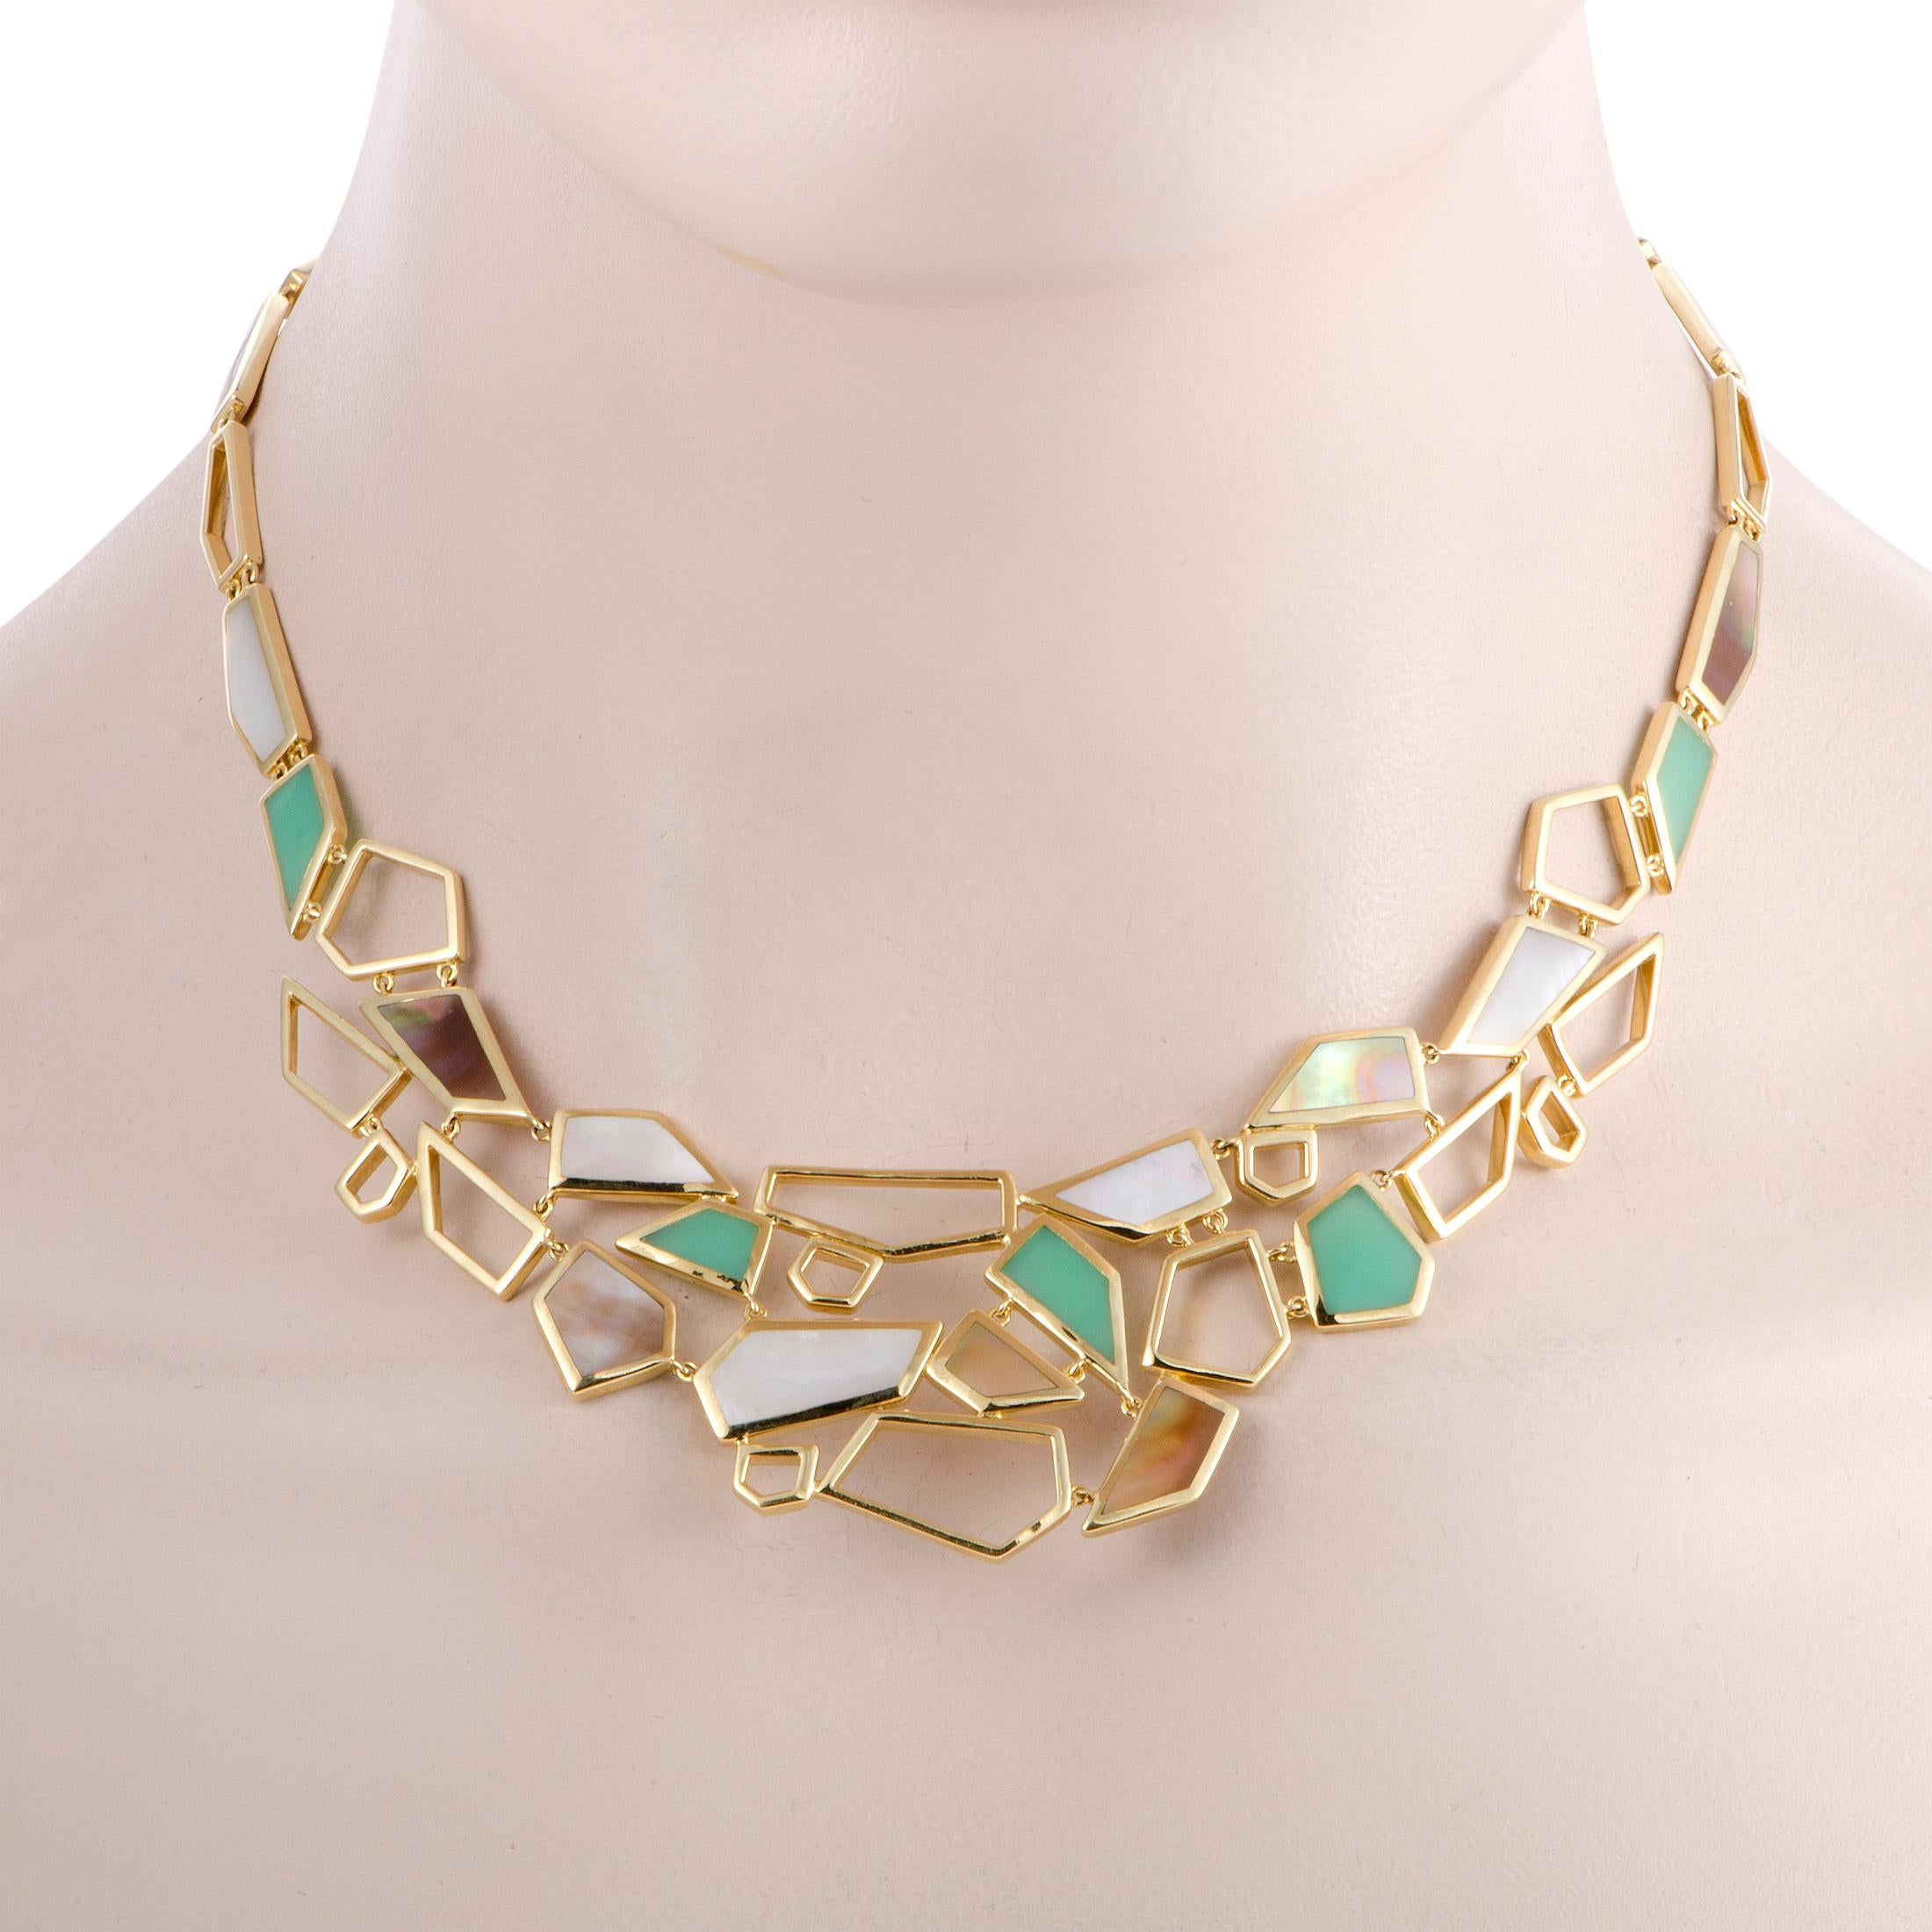 The essence of the spectacular “Rock Candy” collection from Ippolita is captured in this ravishing necklace that boasts elegant design and fashionable appeal. It is made of radiant 18K yellow gold and ingeniously decorated with attractive gems of